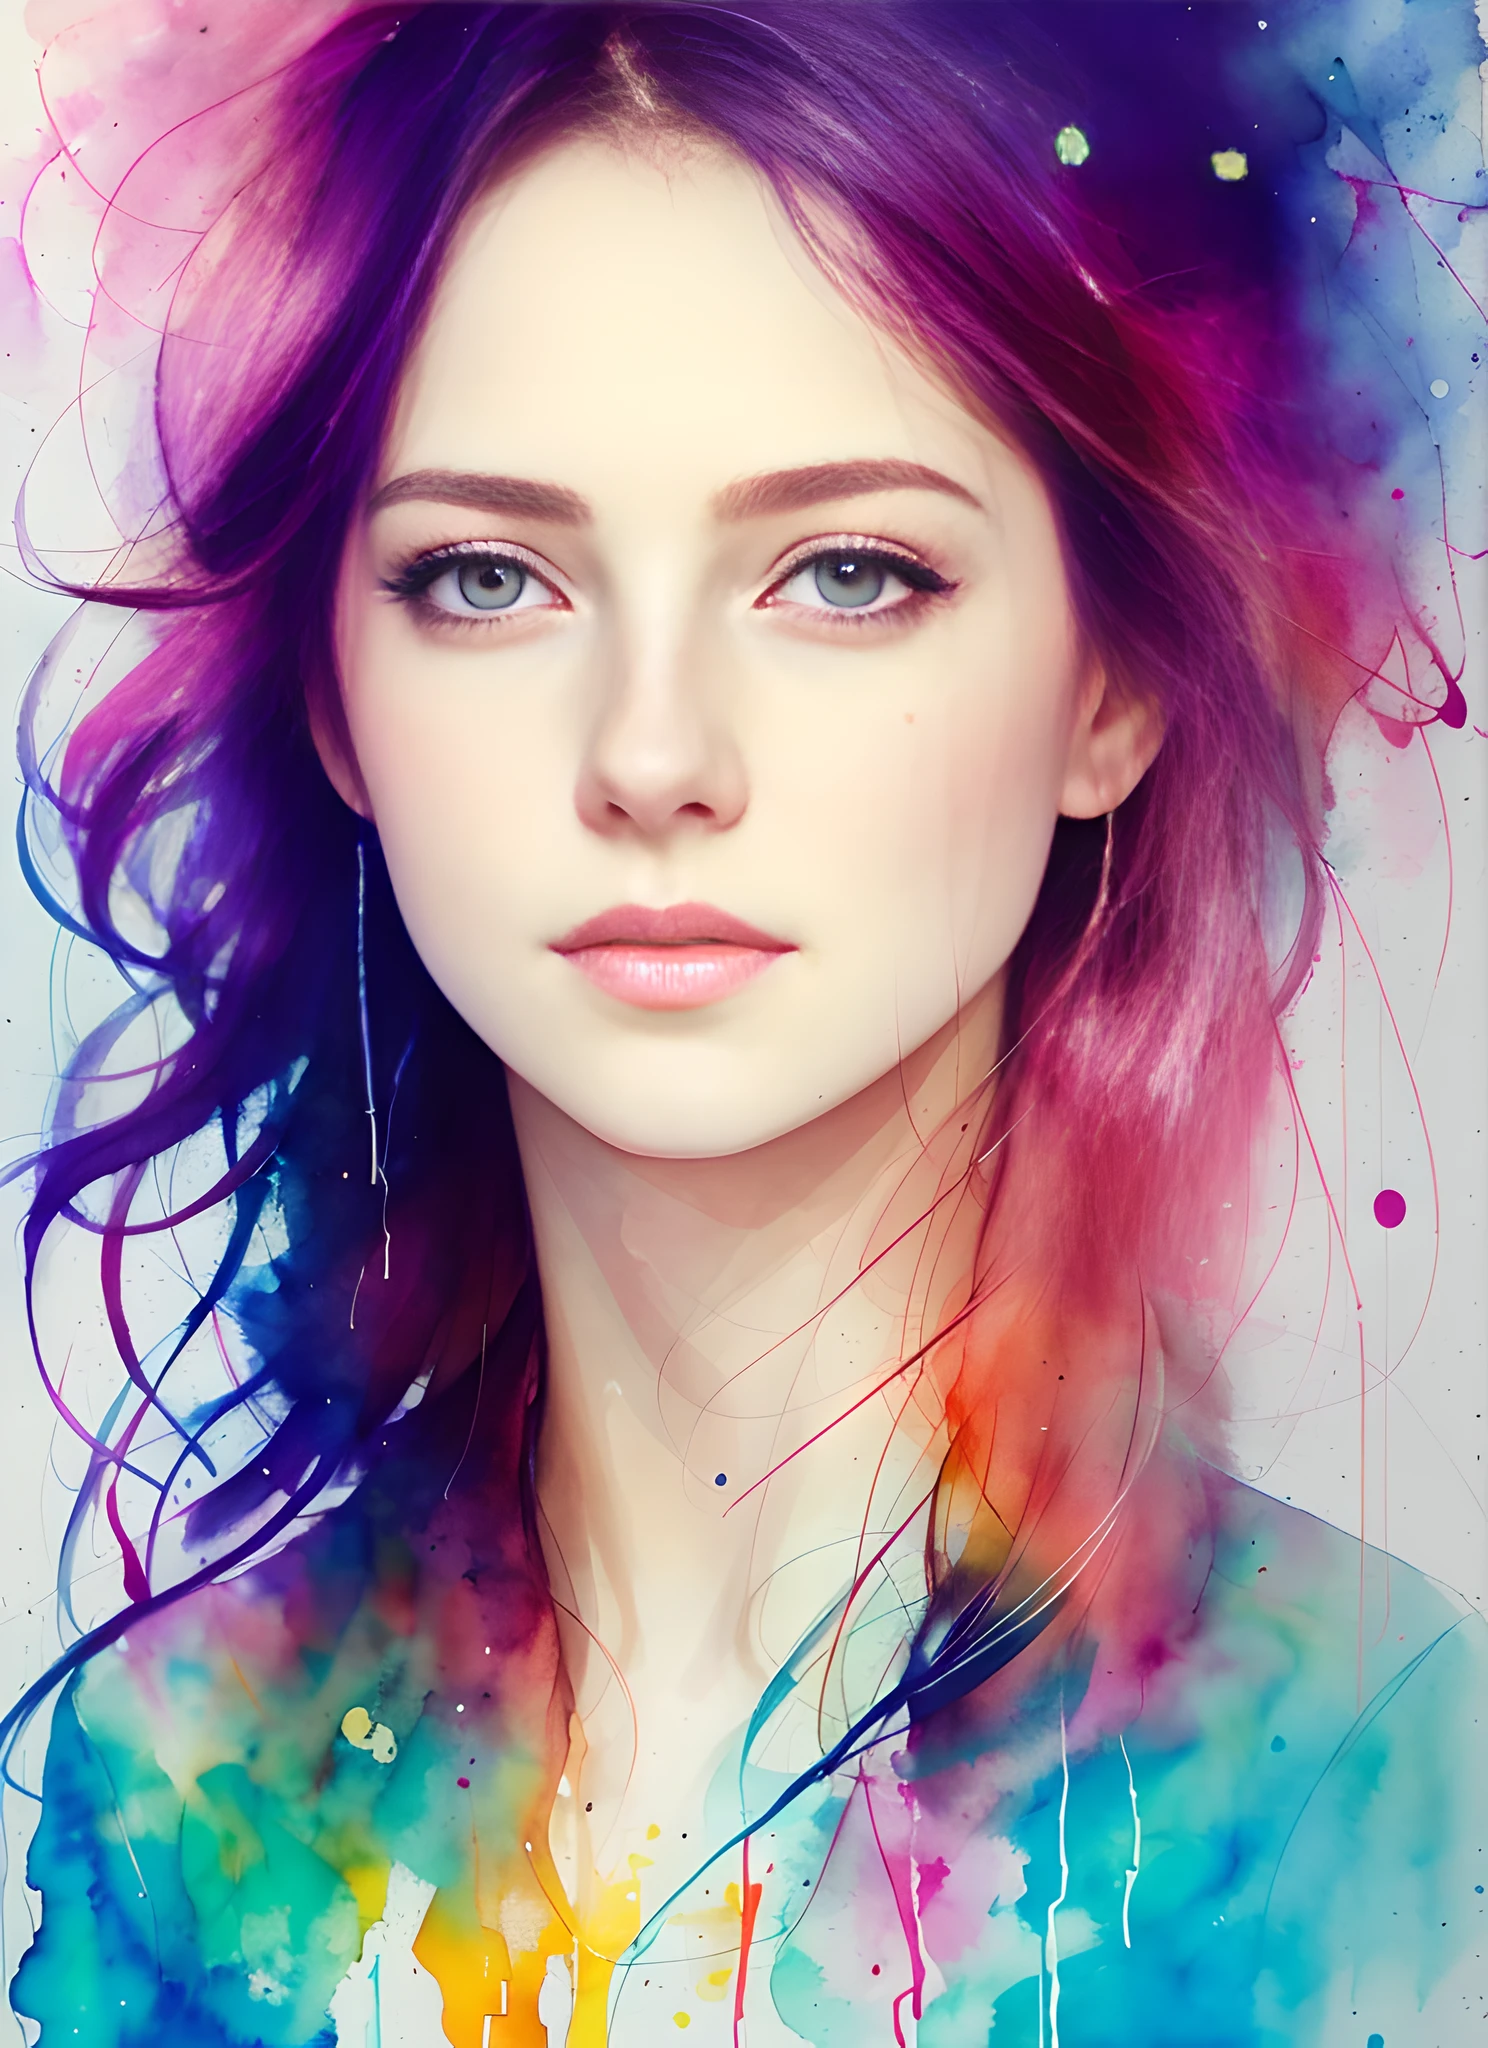 a painting by mse a woman by agnes cecile, luminous design, pastel colours, ink drips, autumn lights